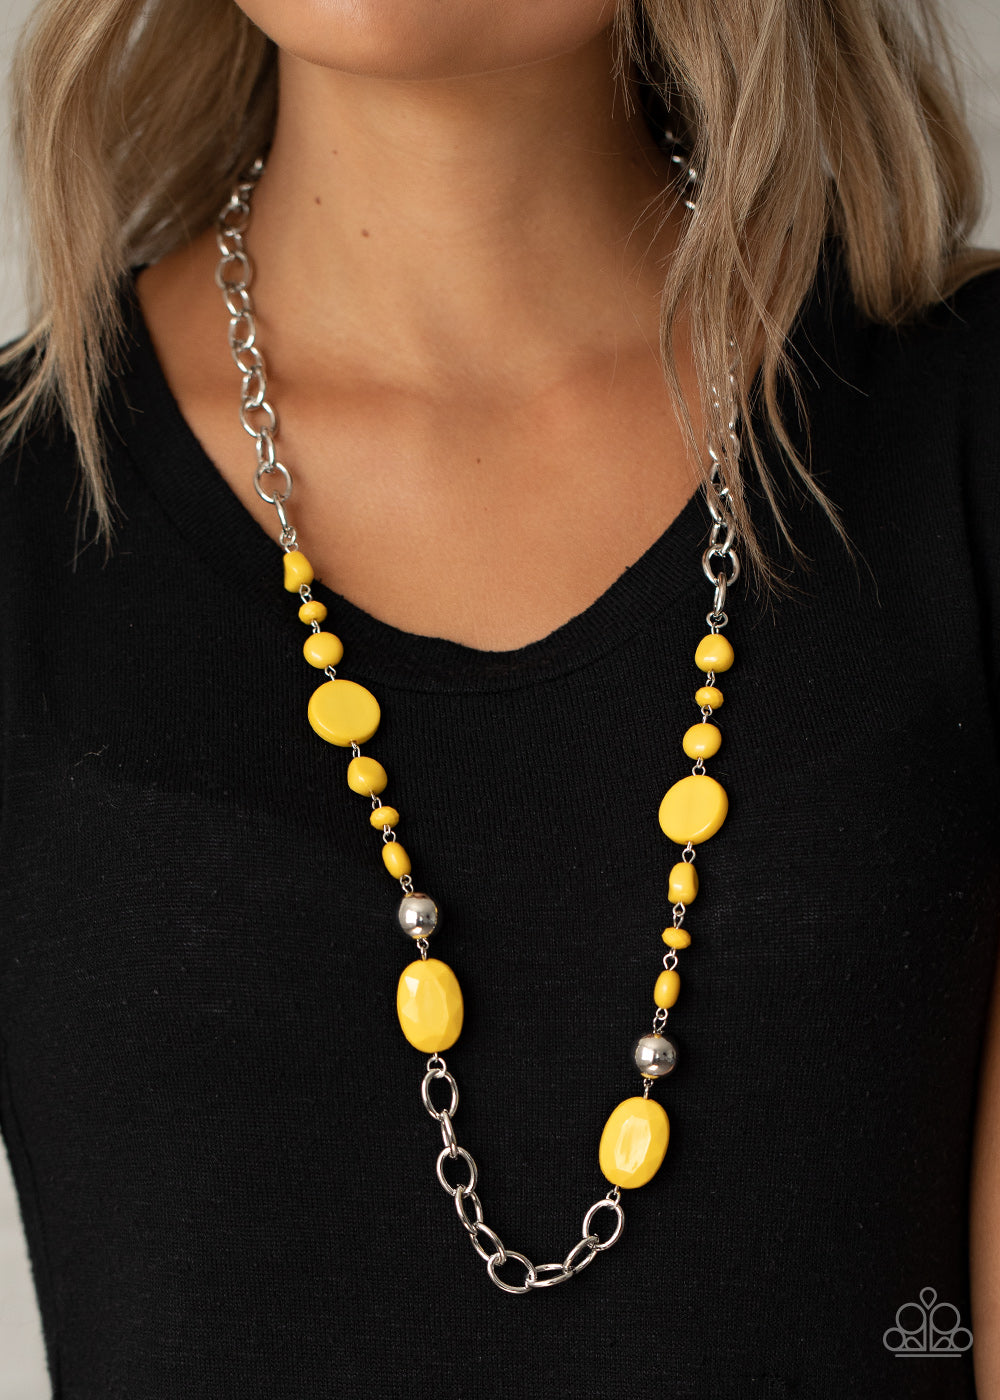 When I GLOW Up - Yellow Paparazzi Necklace